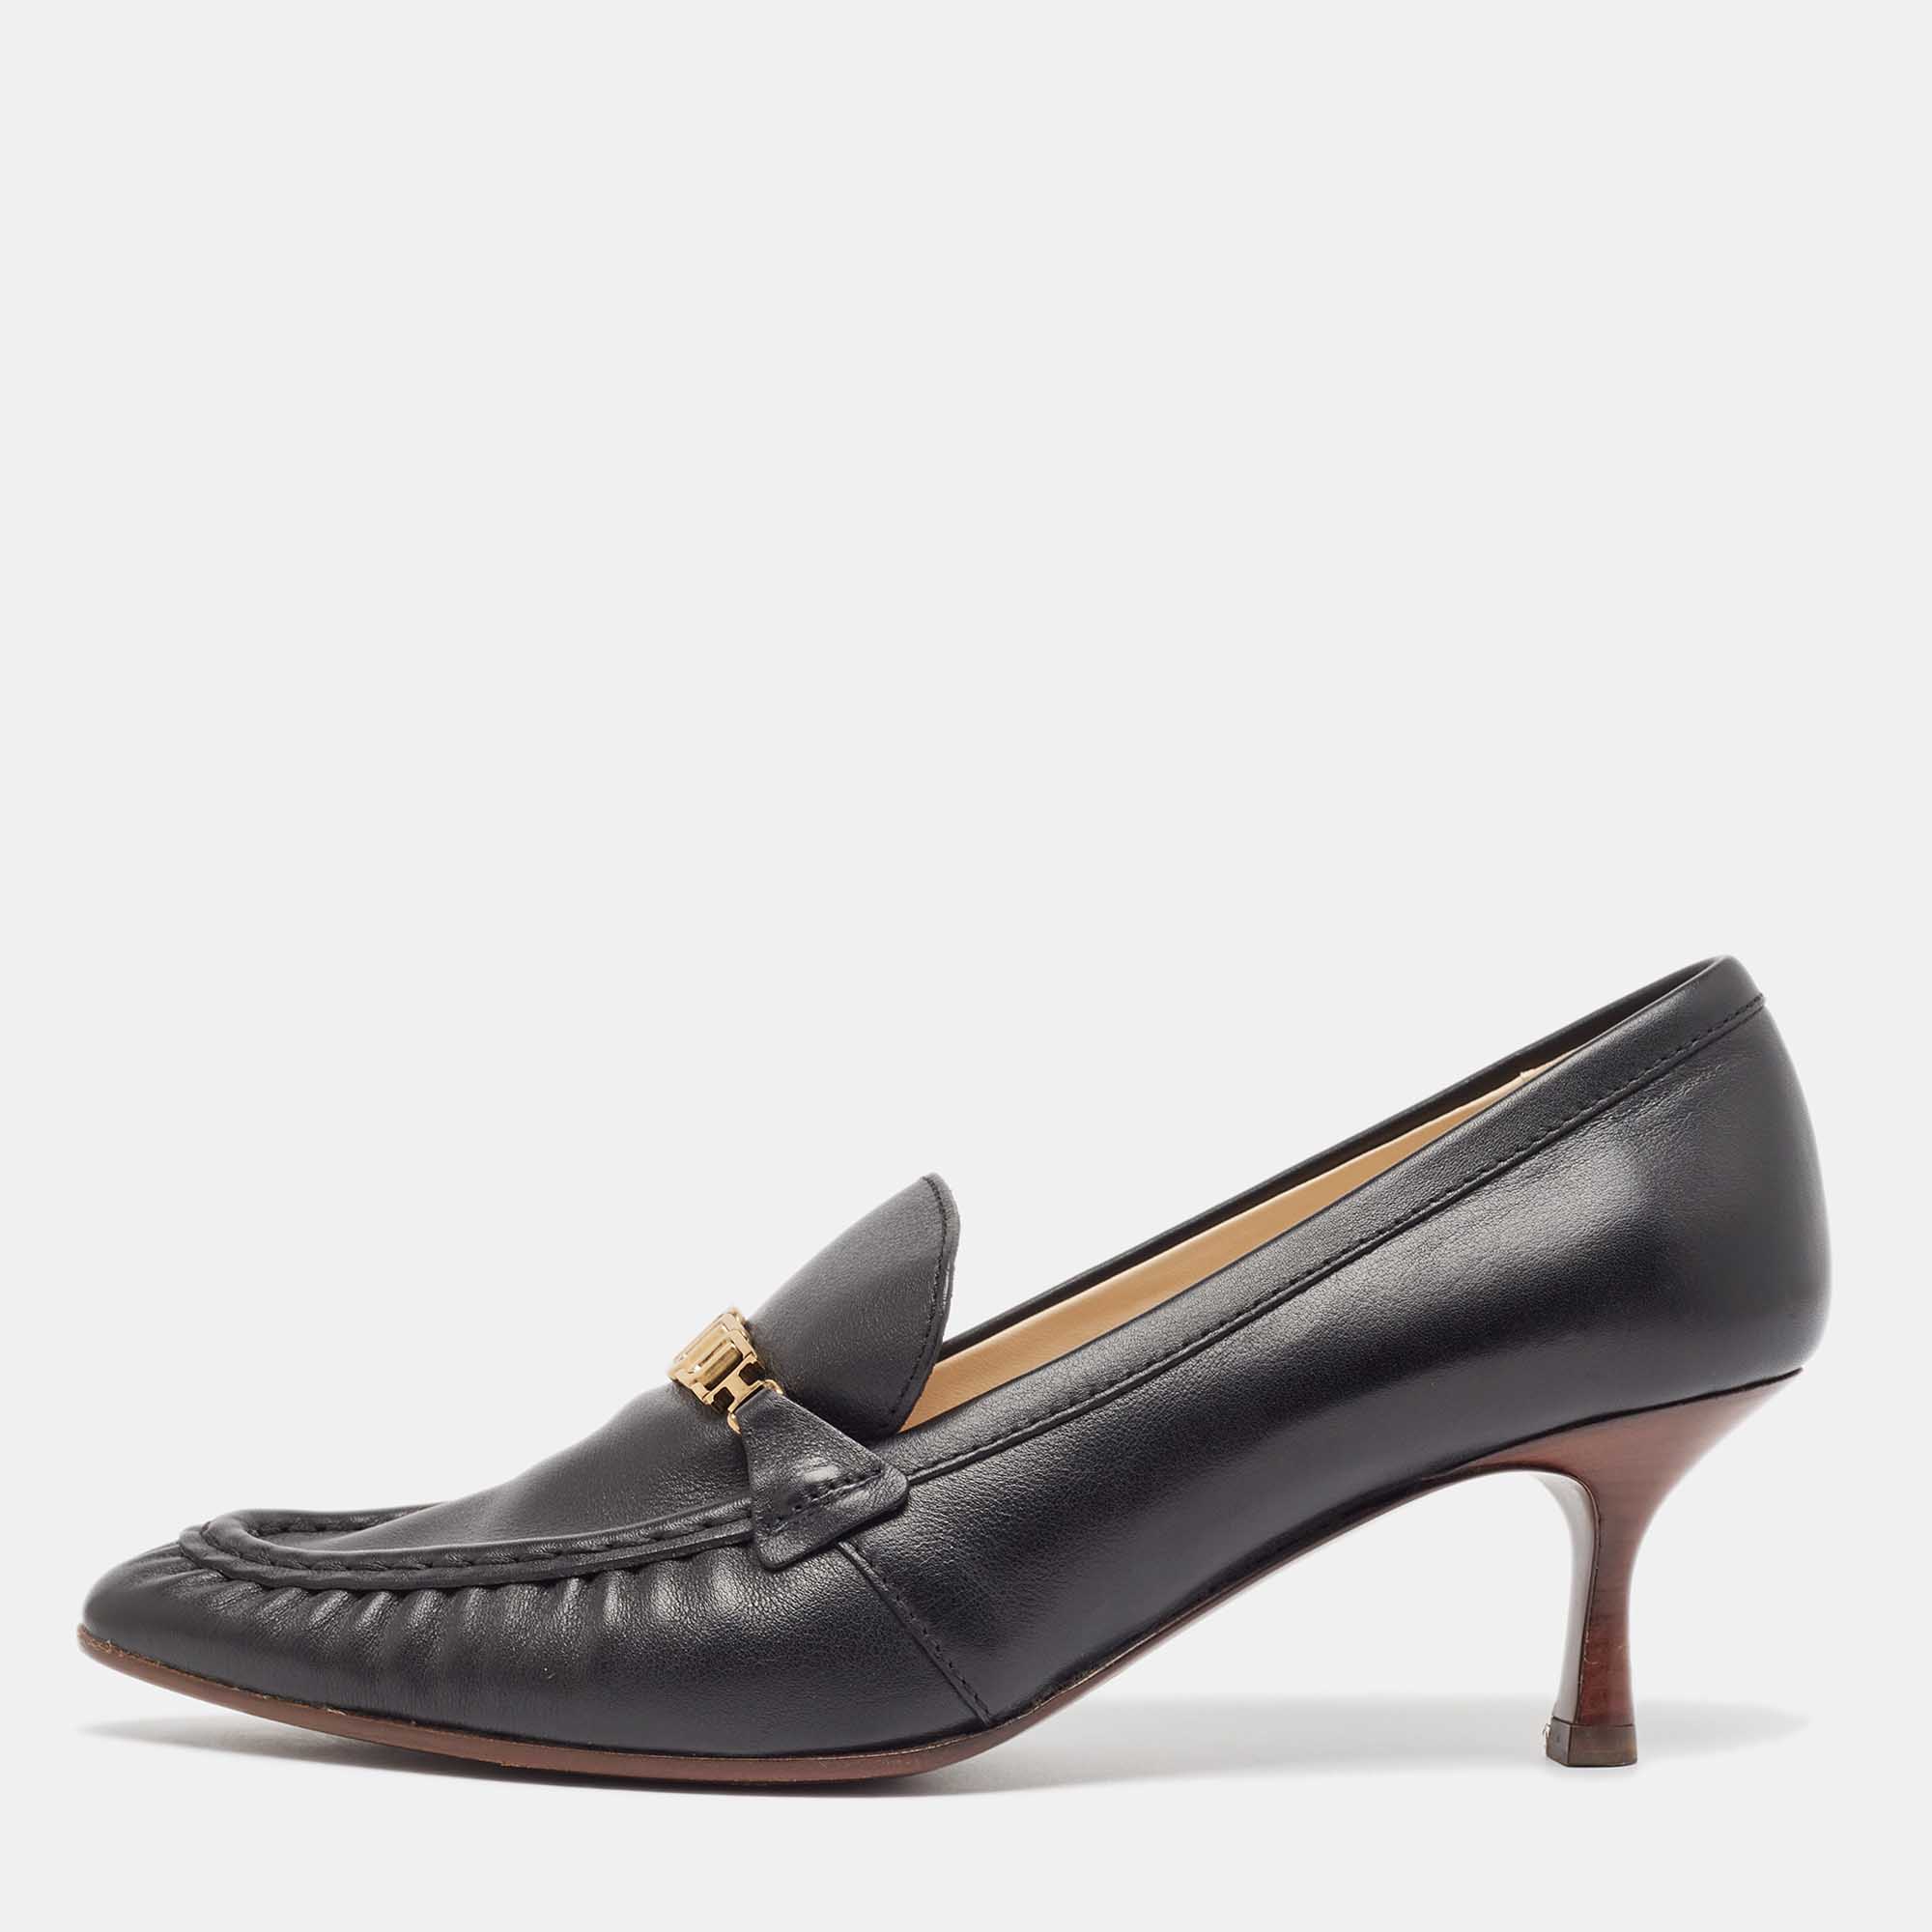 Pre-owned Tod's Black Leather Loafer Pumps Size 39.5